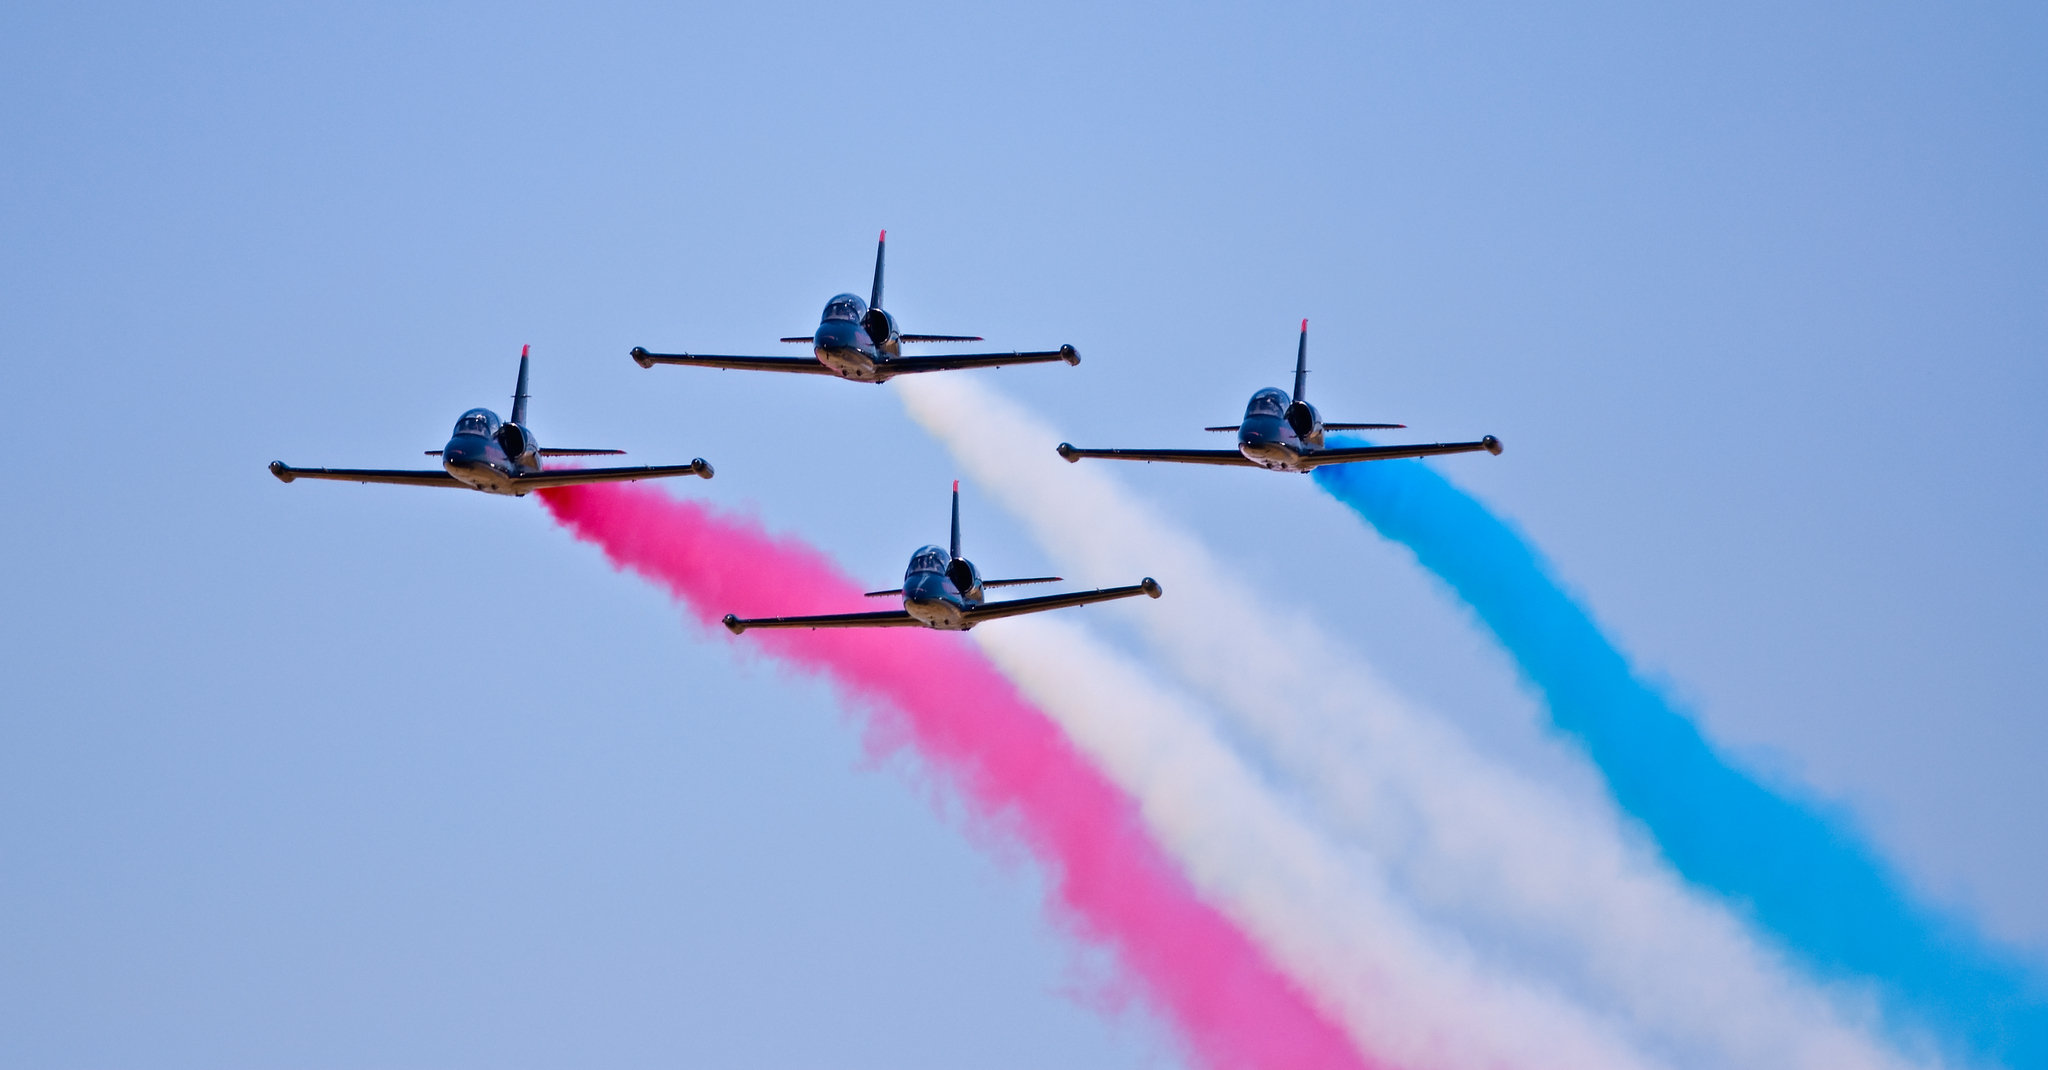 Wildly-popular Patriots Jet Team returns to the STIHL National Championship Air Races this September